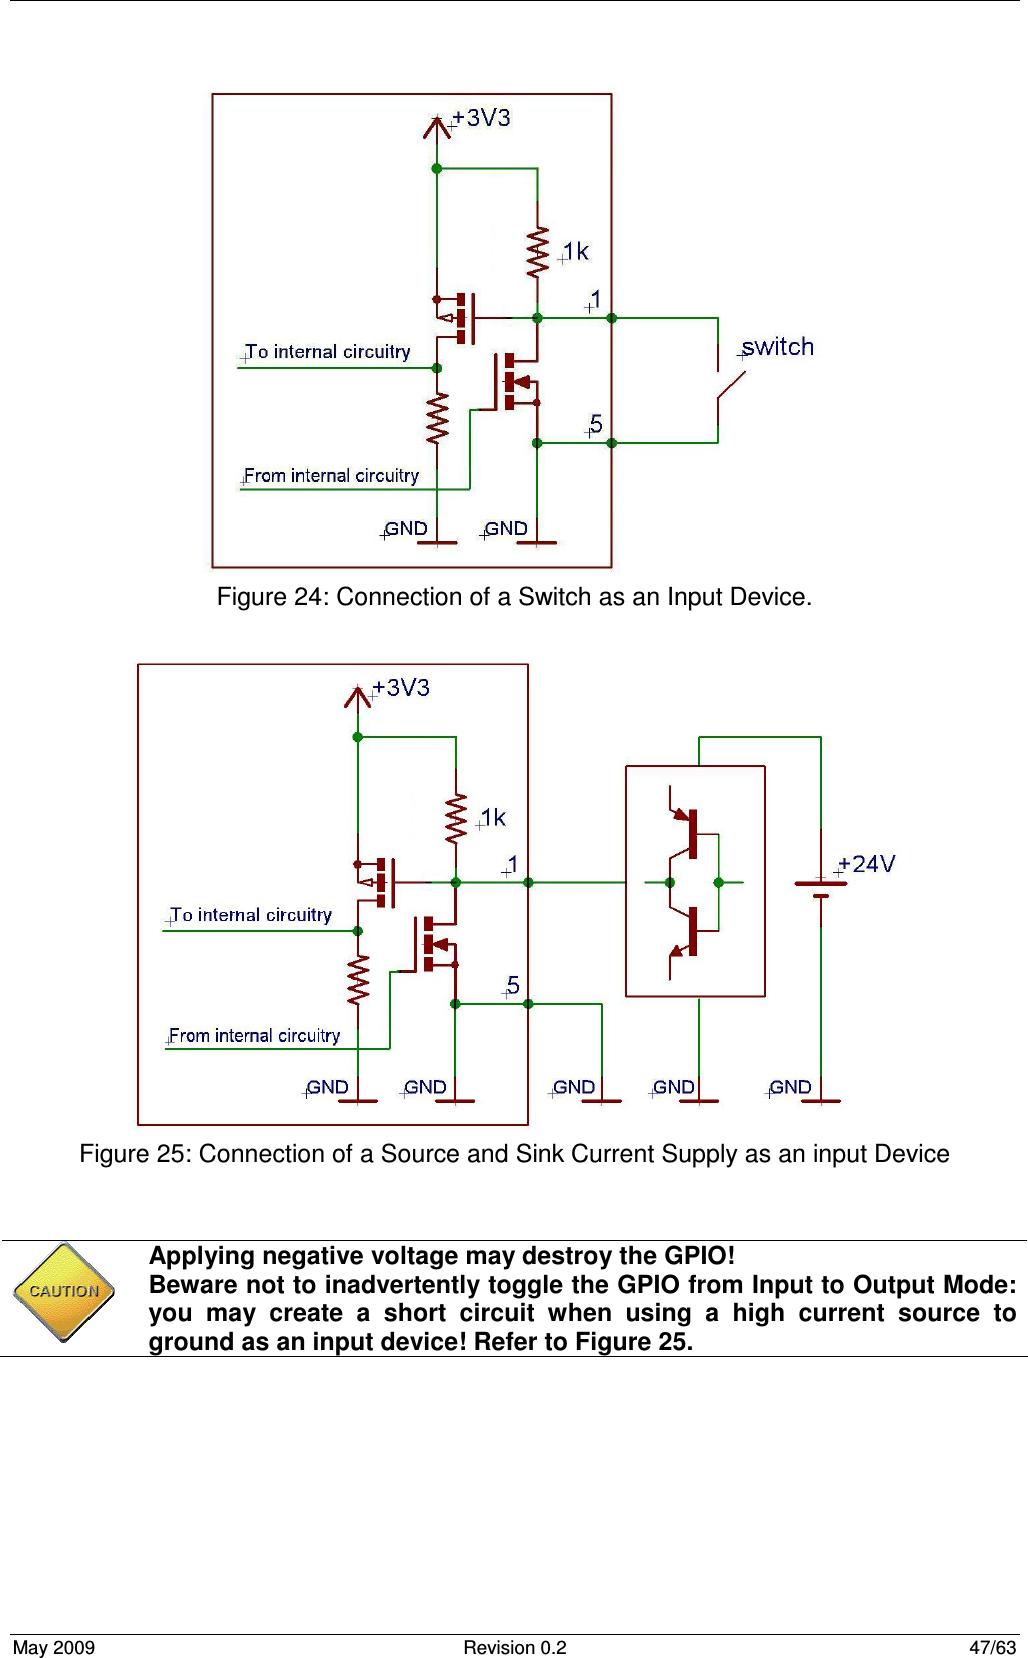  May 2009  Revision 0.2  47/63  Figure 24: Connection of a Switch as an Input Device.   Figure 25: Connection of a Source and Sink Current Supply as an input Device     Applying negative voltage may destroy the GPIO! Beware not to inadvertently toggle the GPIO from Input to Output Mode: you  may  create  a  short  circuit  when  using  a  high  current  source  to ground as an input device! Refer to Figure 25. 